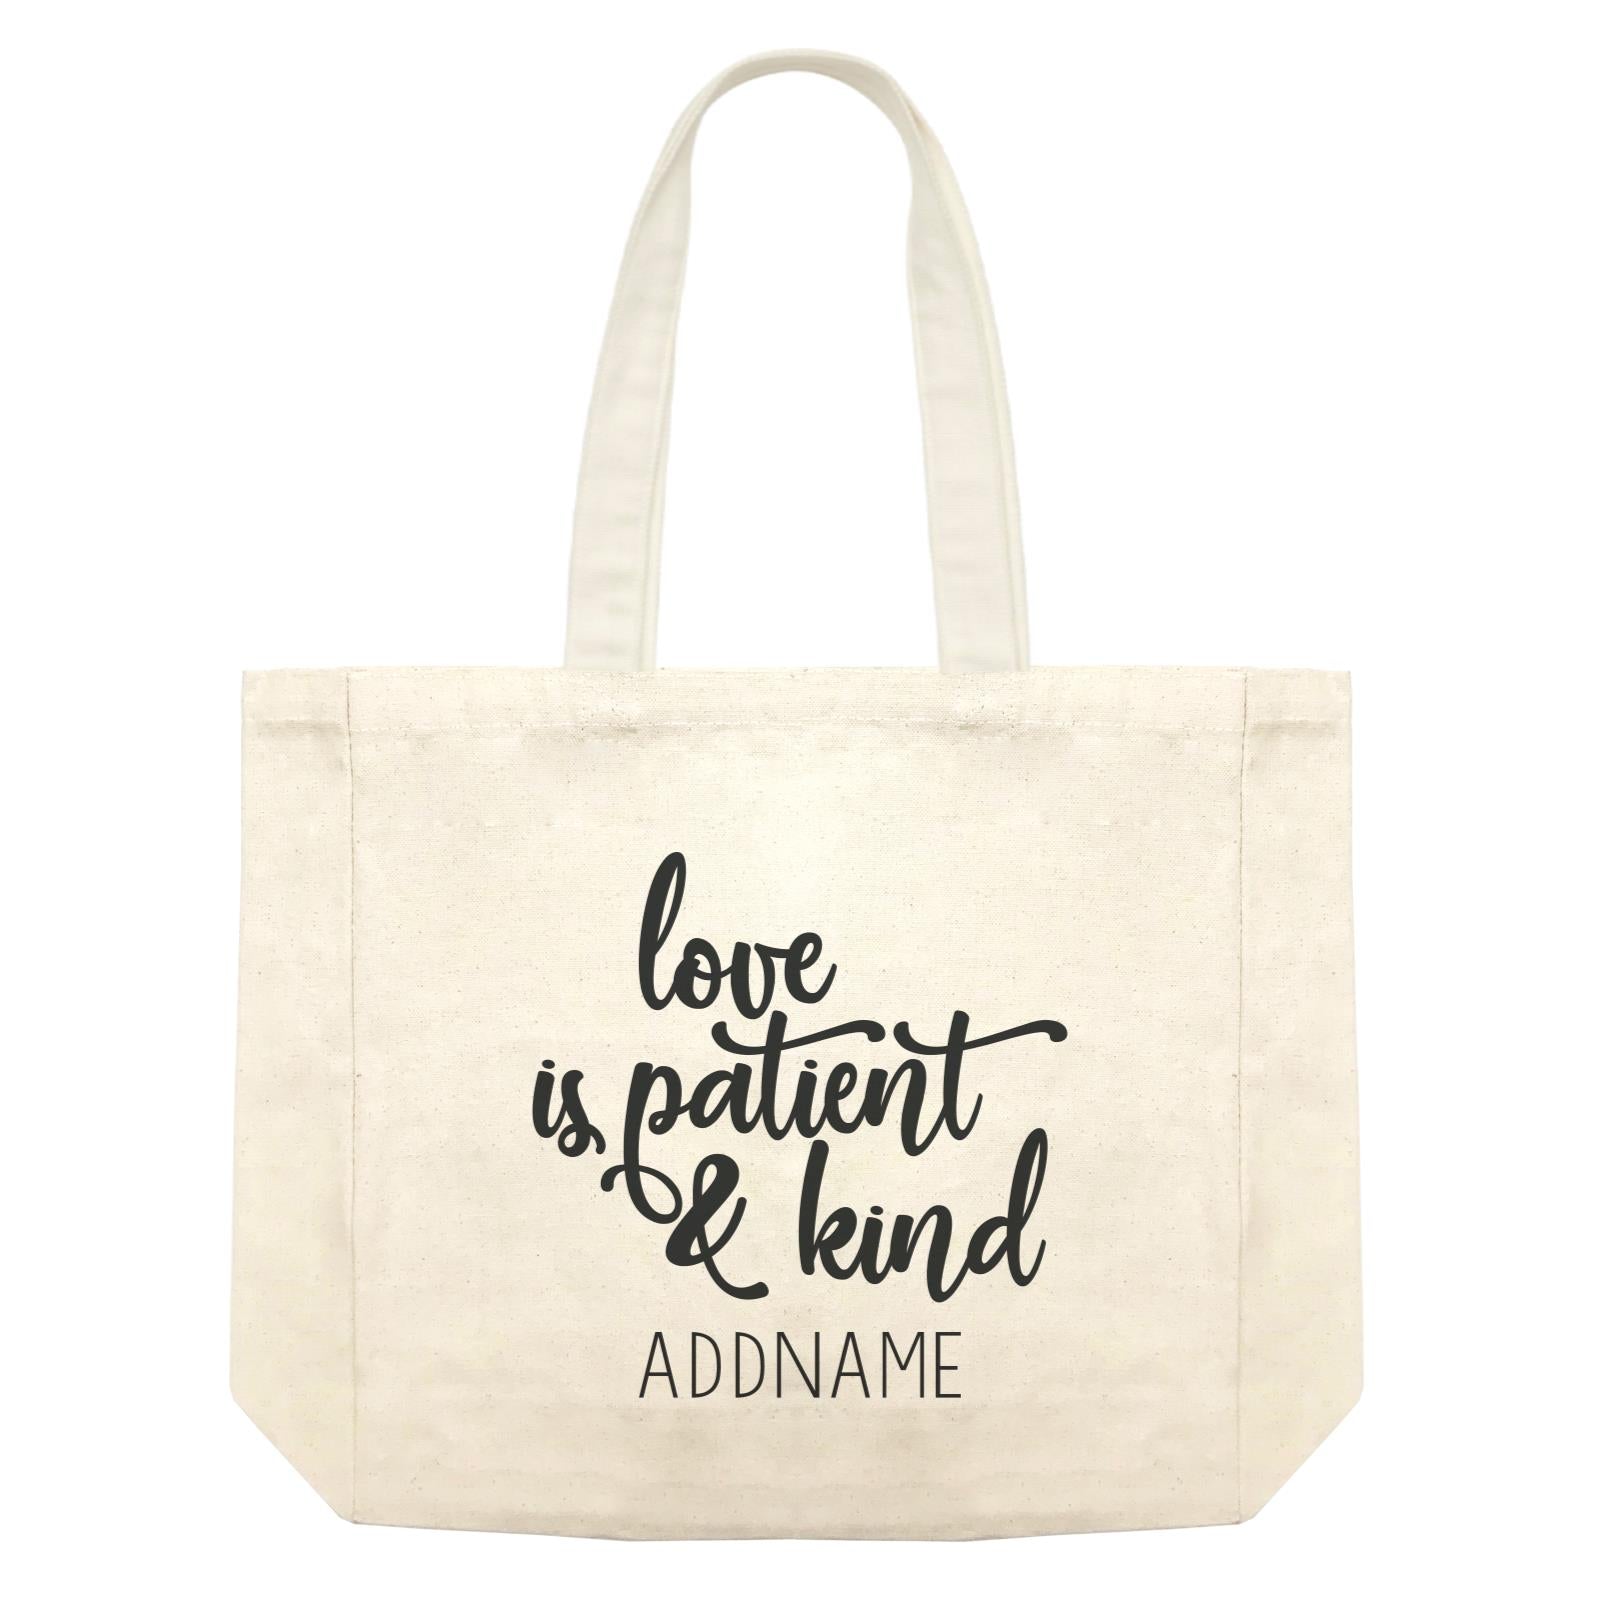 Inspiration Quotes Love Is Patient And Kind Addname Shopping Bag